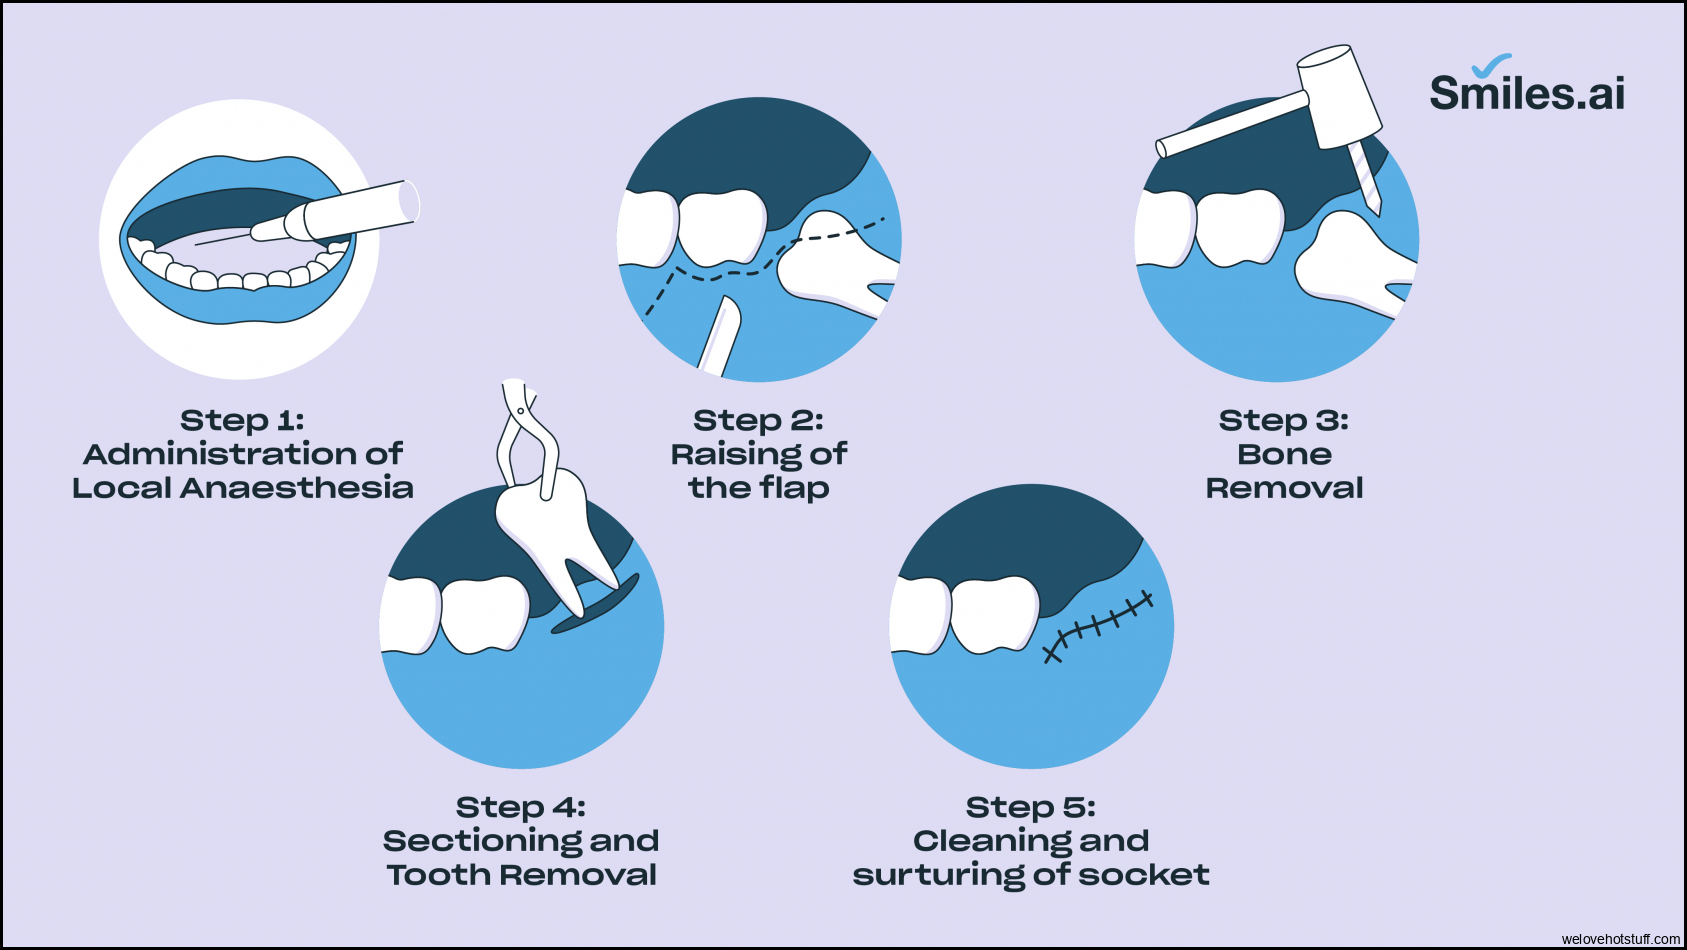 Everything you need to know about the Wisdom tooth extraction